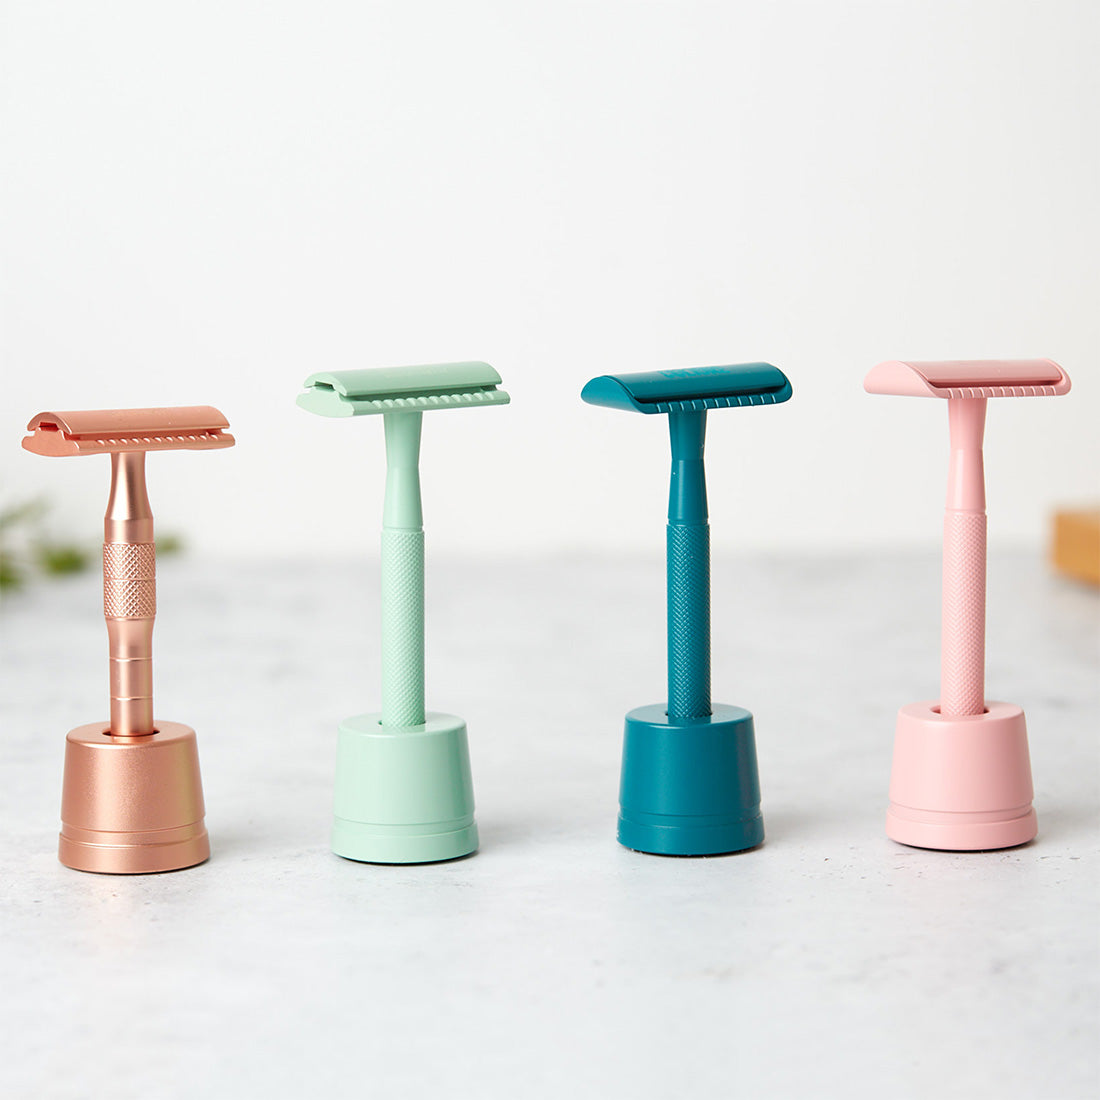 Safety Razor Stand - Designs Match Our Razors-0